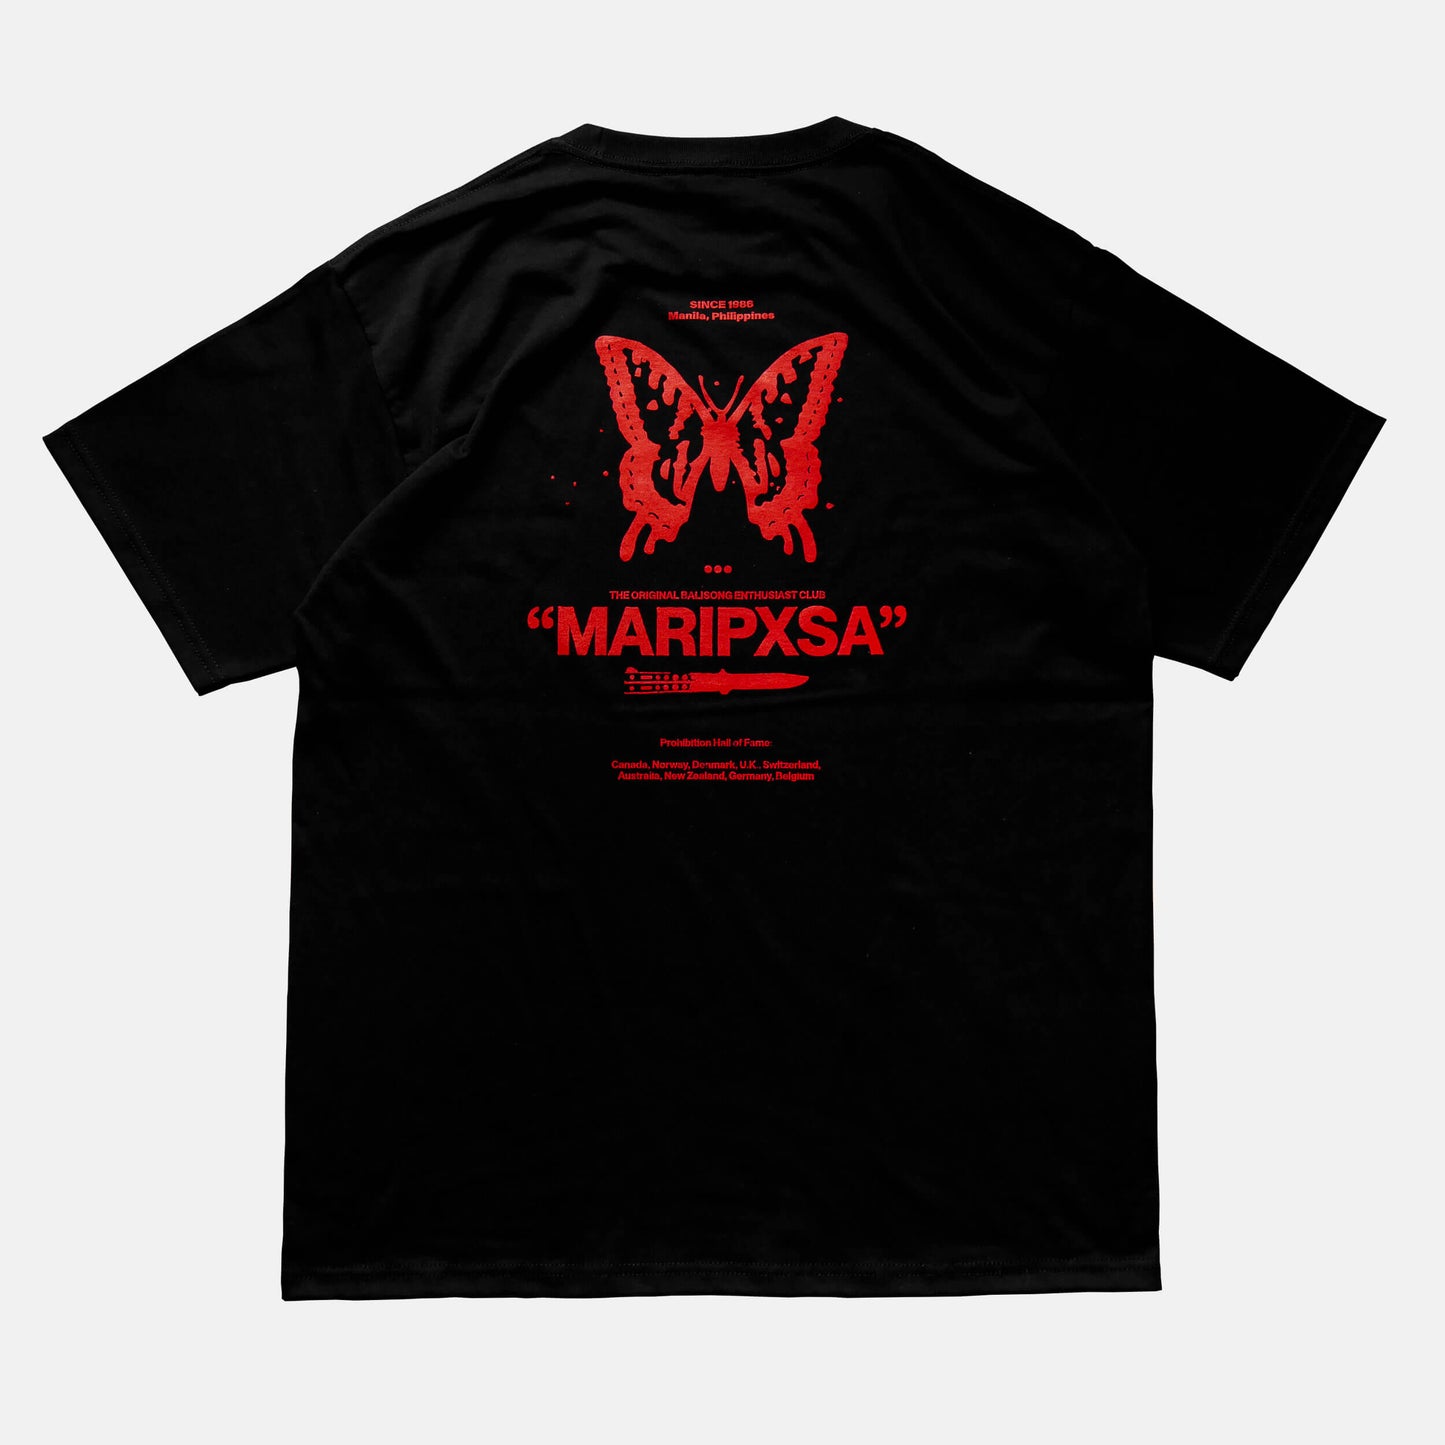 Back view of the screen-pinted 'MARIPXSA' BALISONG CLUB black t-shirt from PHOSIS Clothing